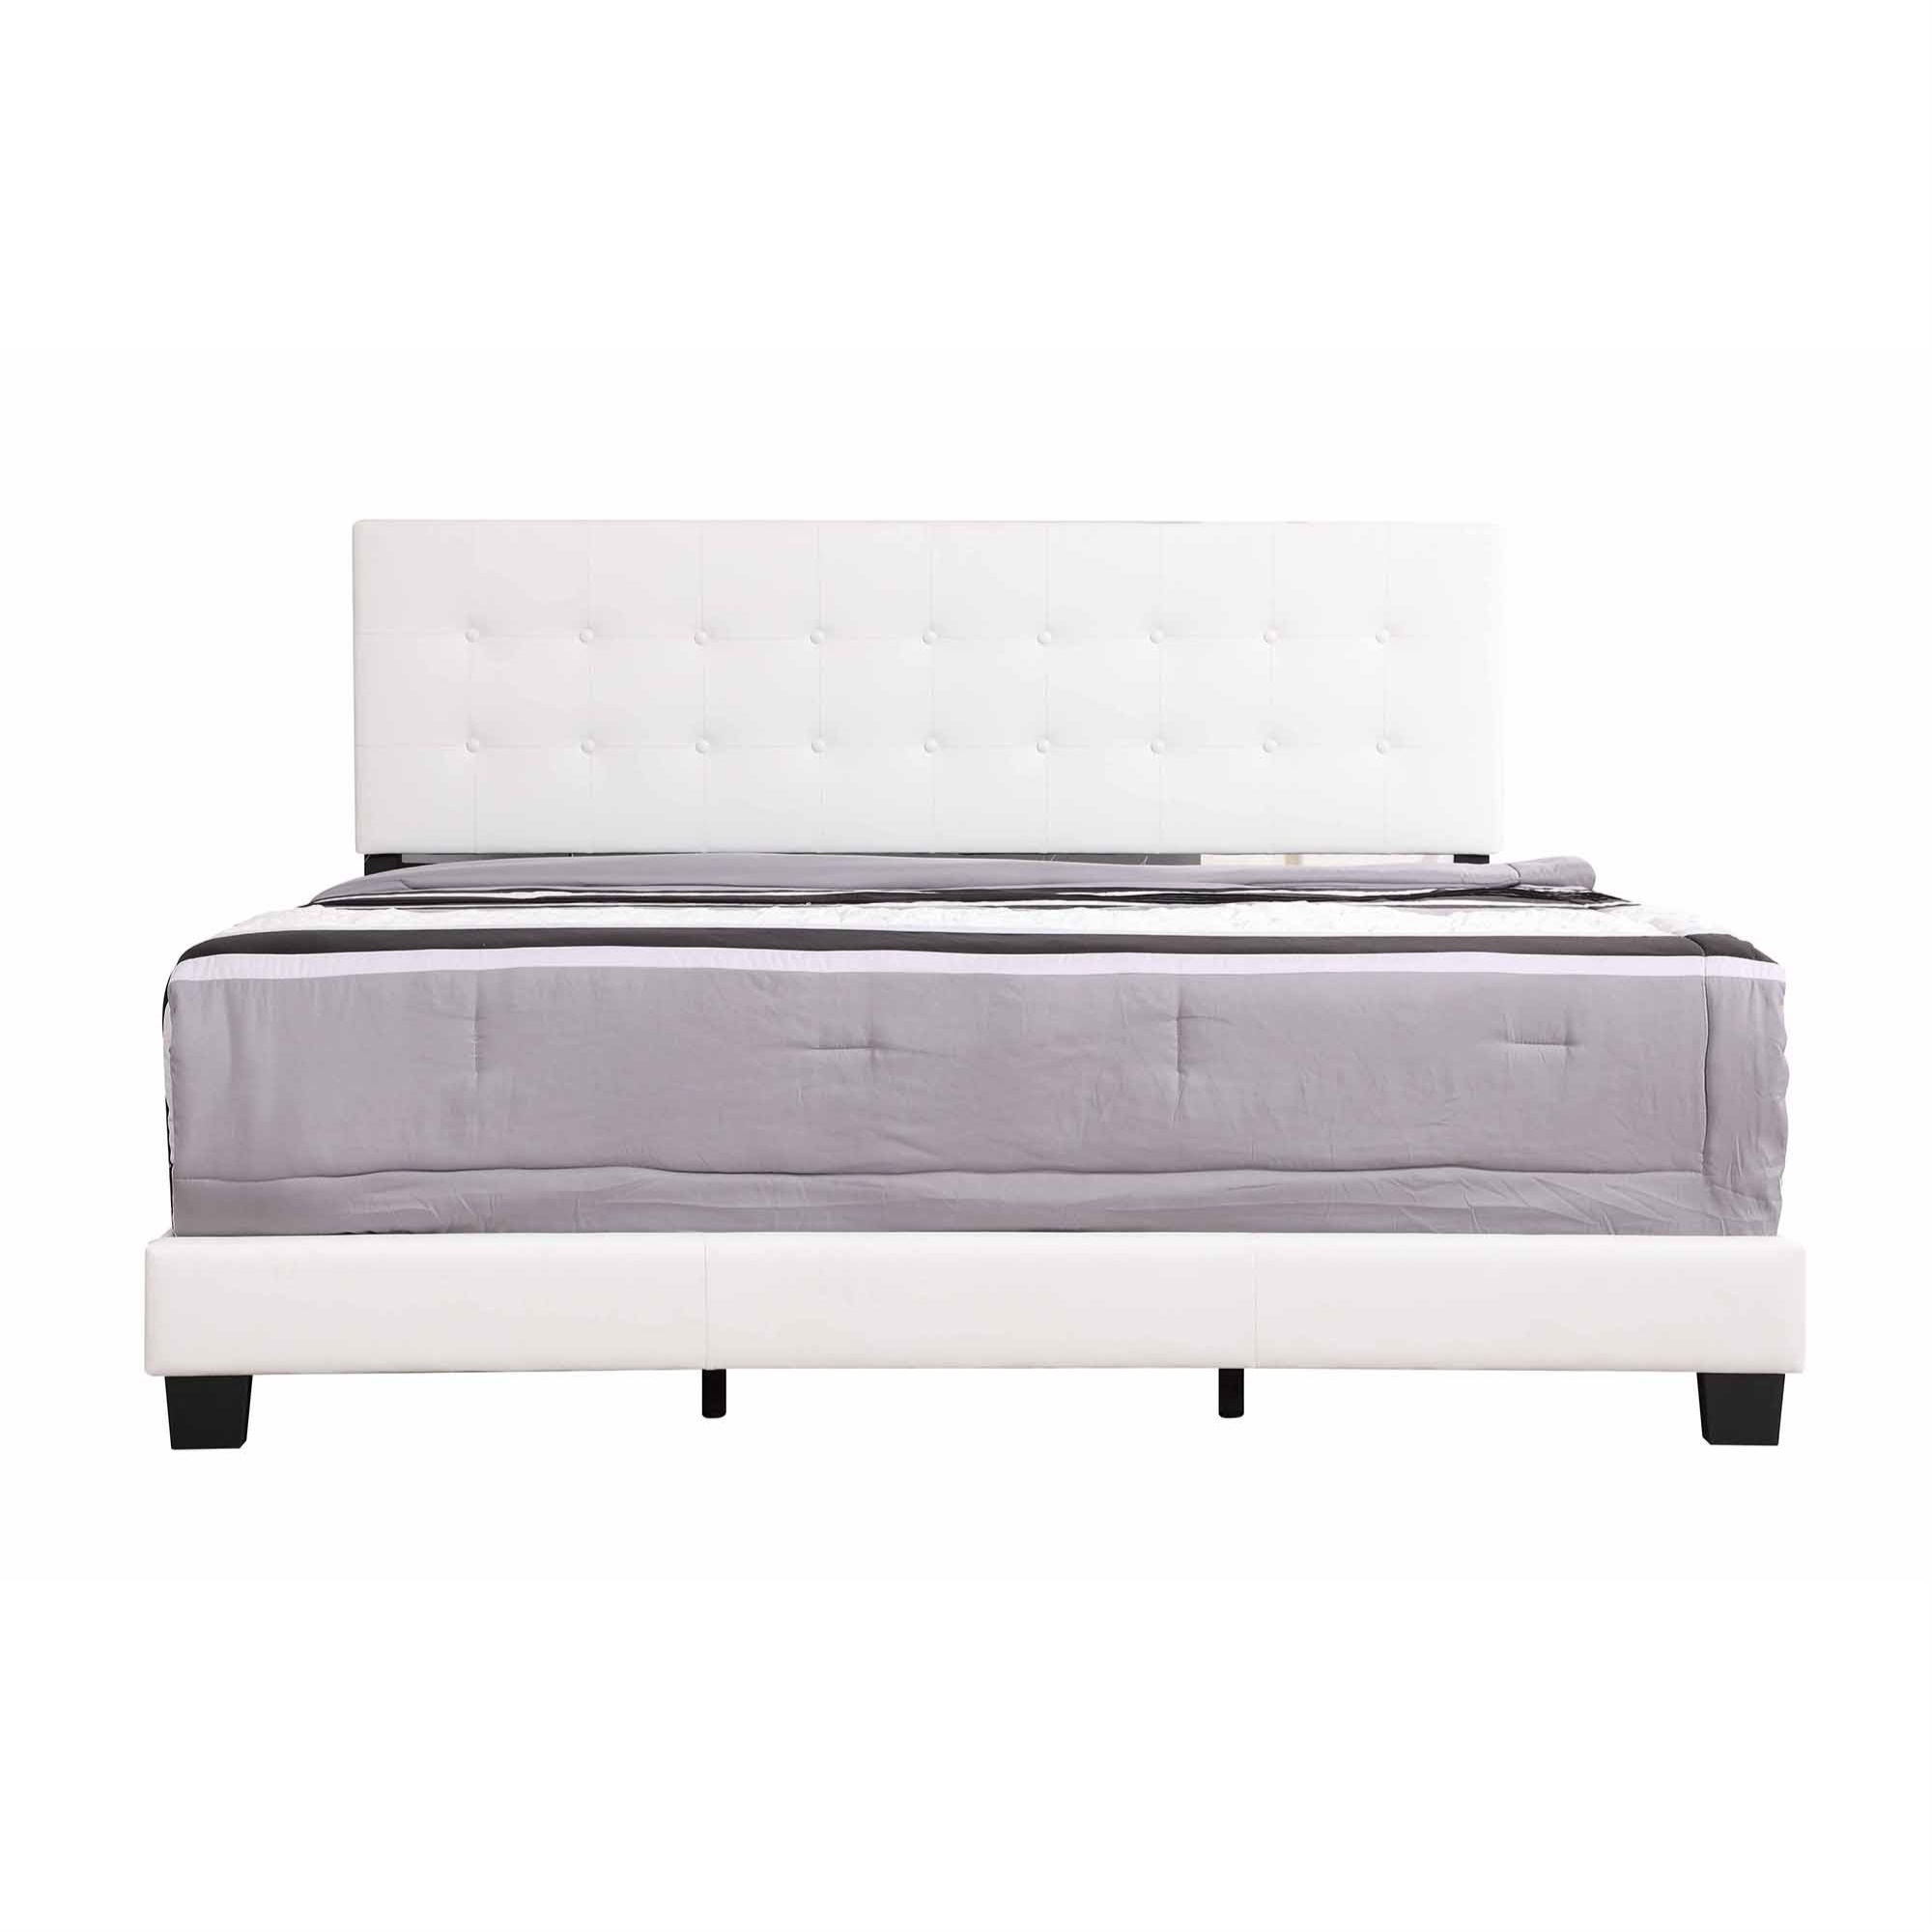 Passion Furniture  Caldwell Faux Leather Button Tufted Panel Bed, White - King Size - image 2 of 5